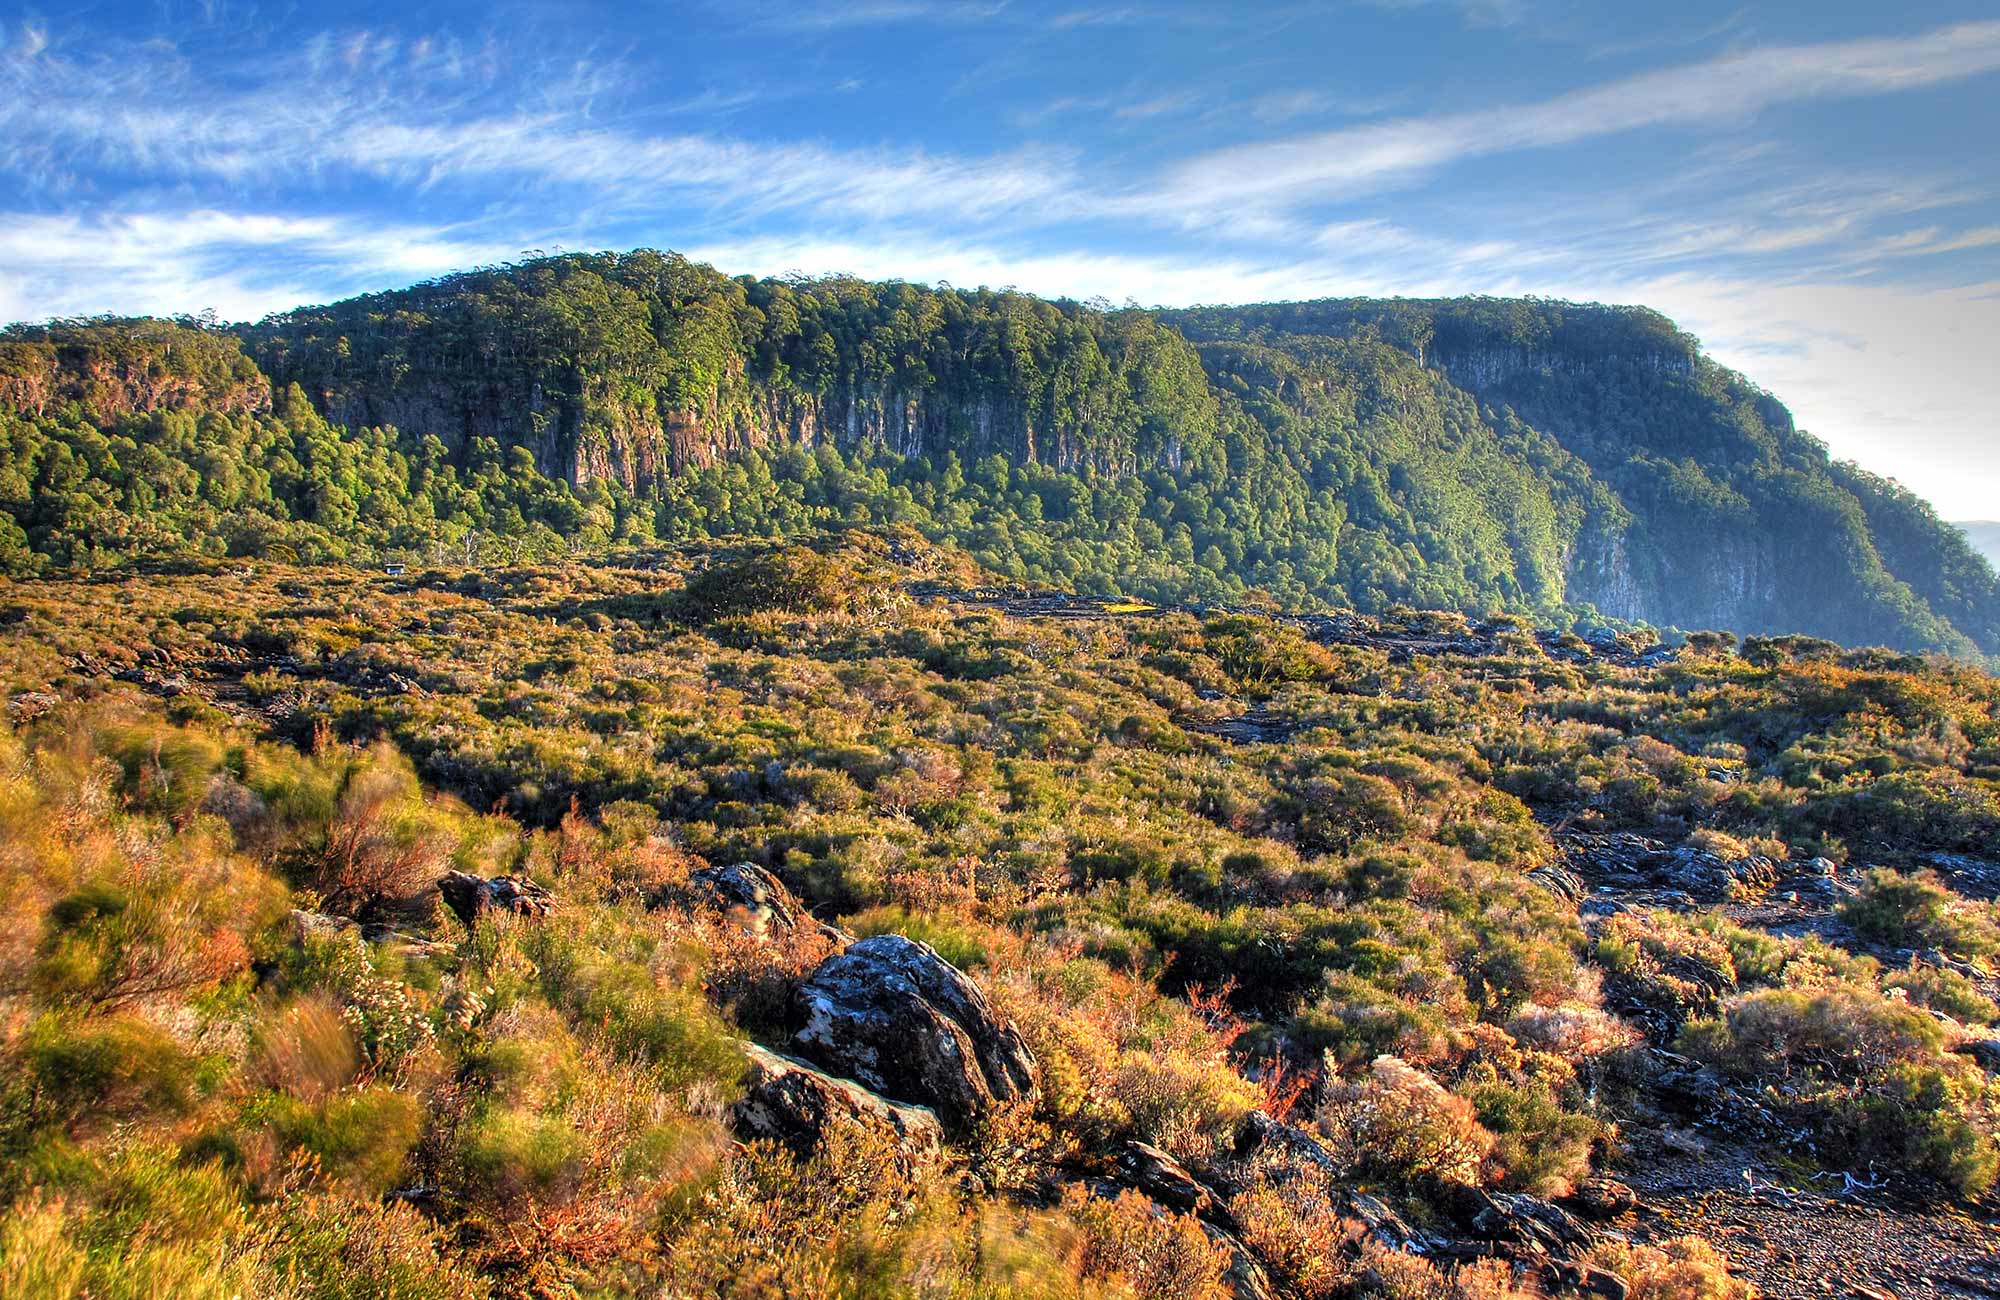 Wrights Lookout, New England National Park. Photo: S Ruming